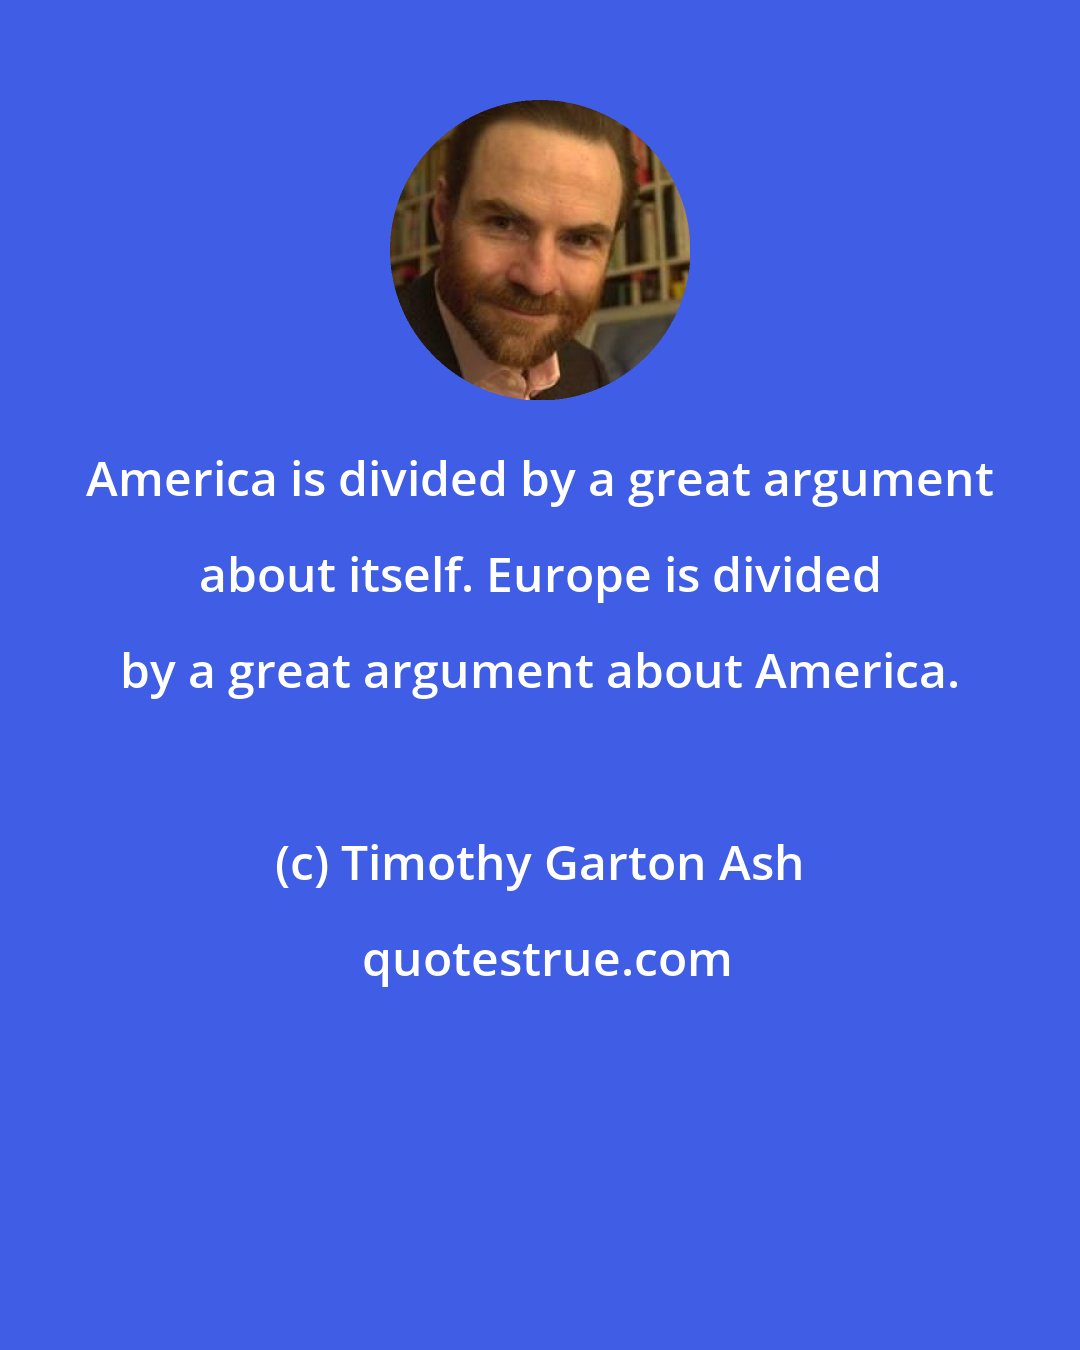 Timothy Garton Ash: America is divided by a great argument about itself. Europe is divided by a great argument about America.